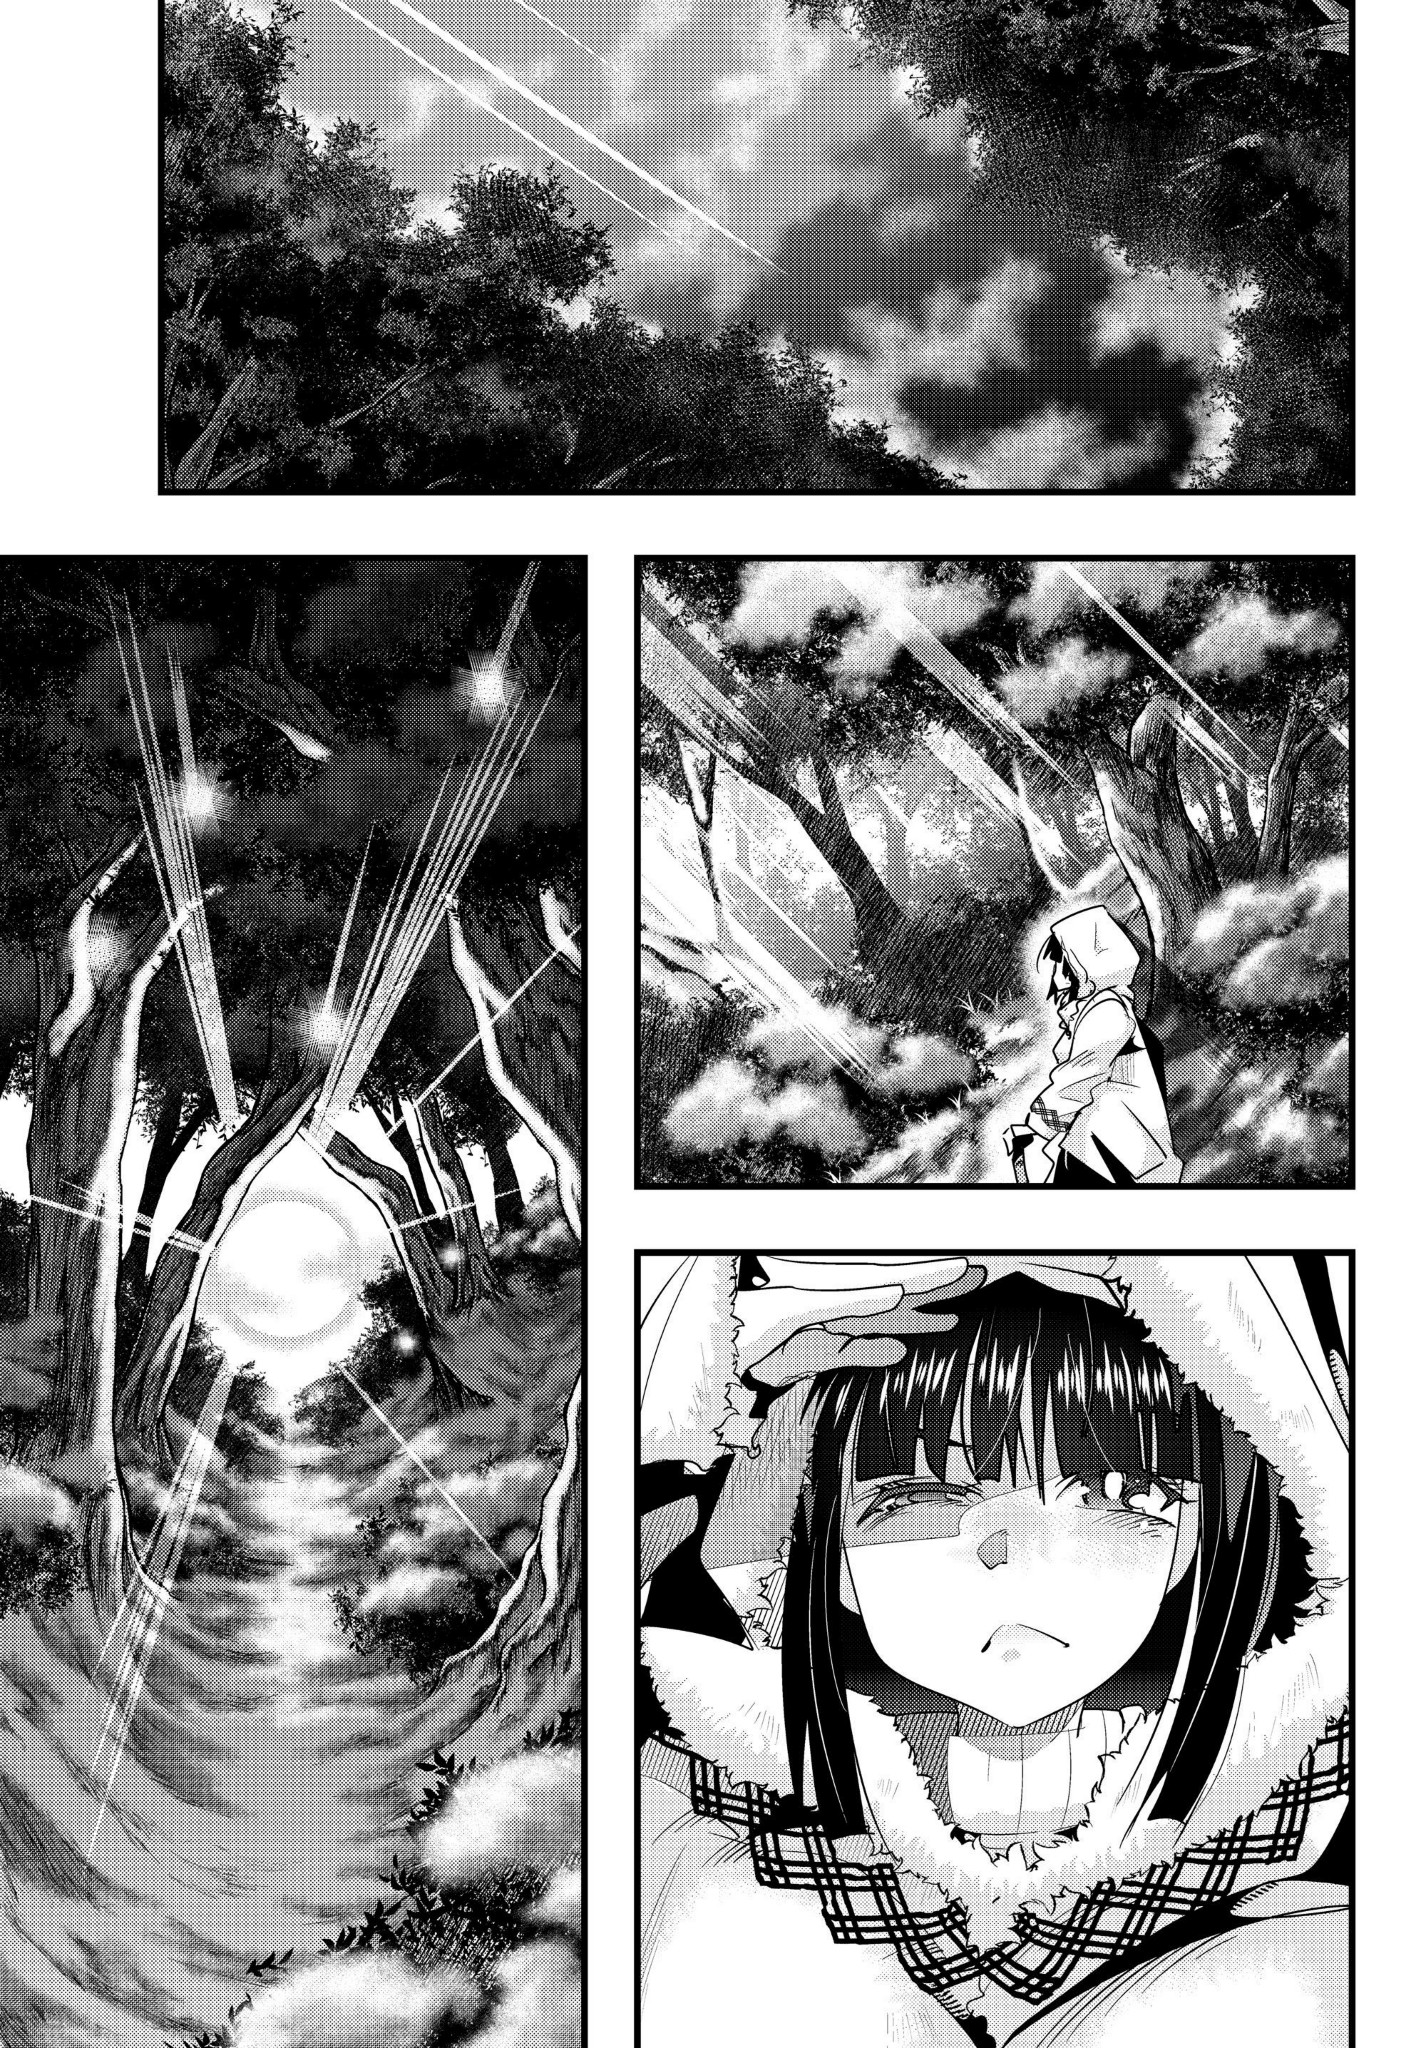 Dilarang COPAS - situs resmi www.mangacanblog.com - Komik i dont really get it but it looks like i was reincarnated in another world 09.2 - chapter 9.2 10.2 Indonesia i dont really get it but it looks like i was reincarnated in another world 09.2 - chapter 9.2 Terbaru 16|Baca Manga Komik Indonesia|Mangacan